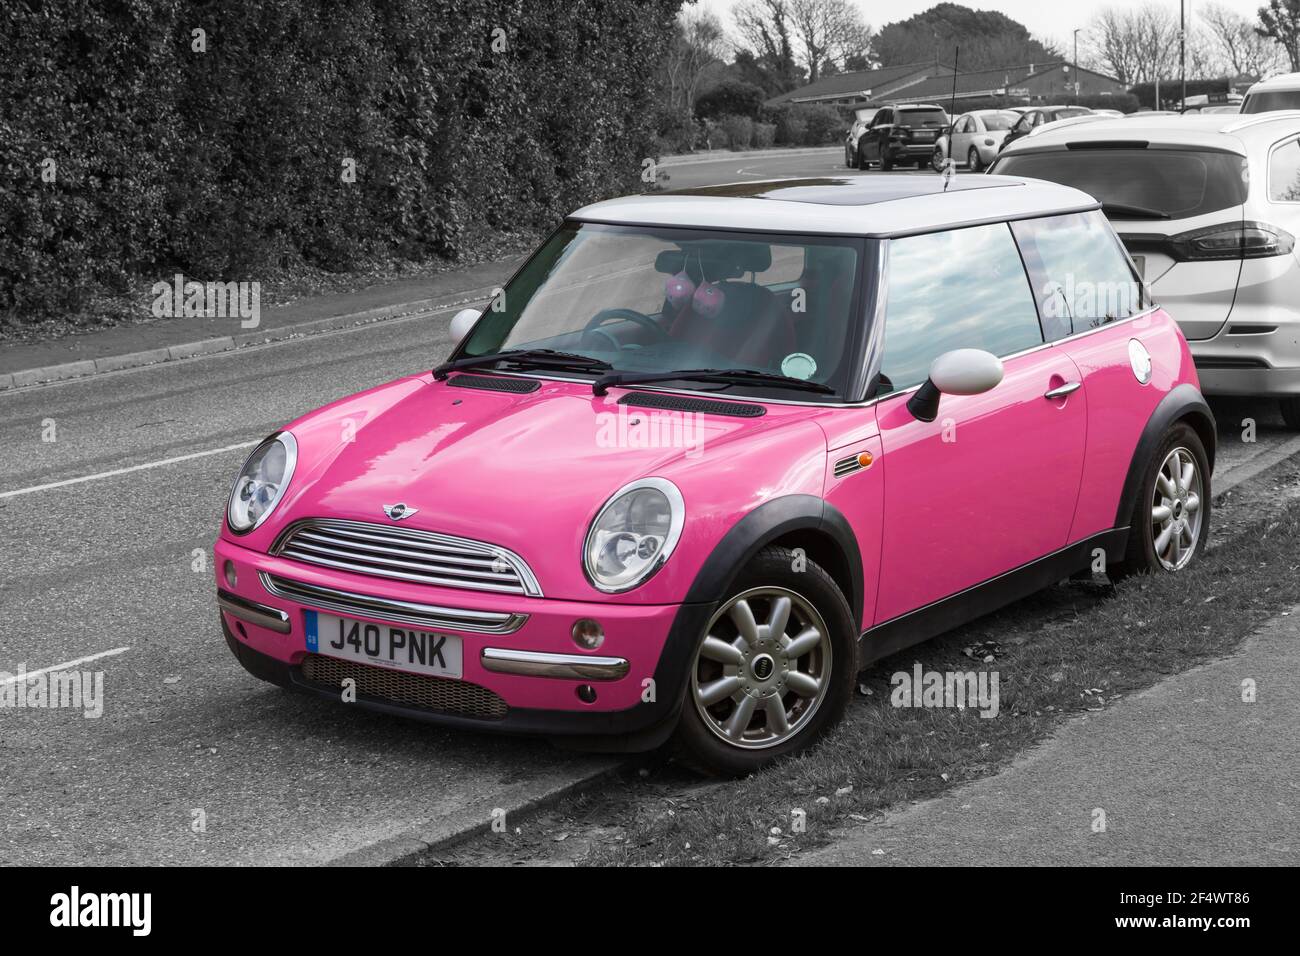 Pink Mini Cooper car with personalised number plate, registration plate, parked in road at Bournemouth, Dorset UK in March Stock Photo